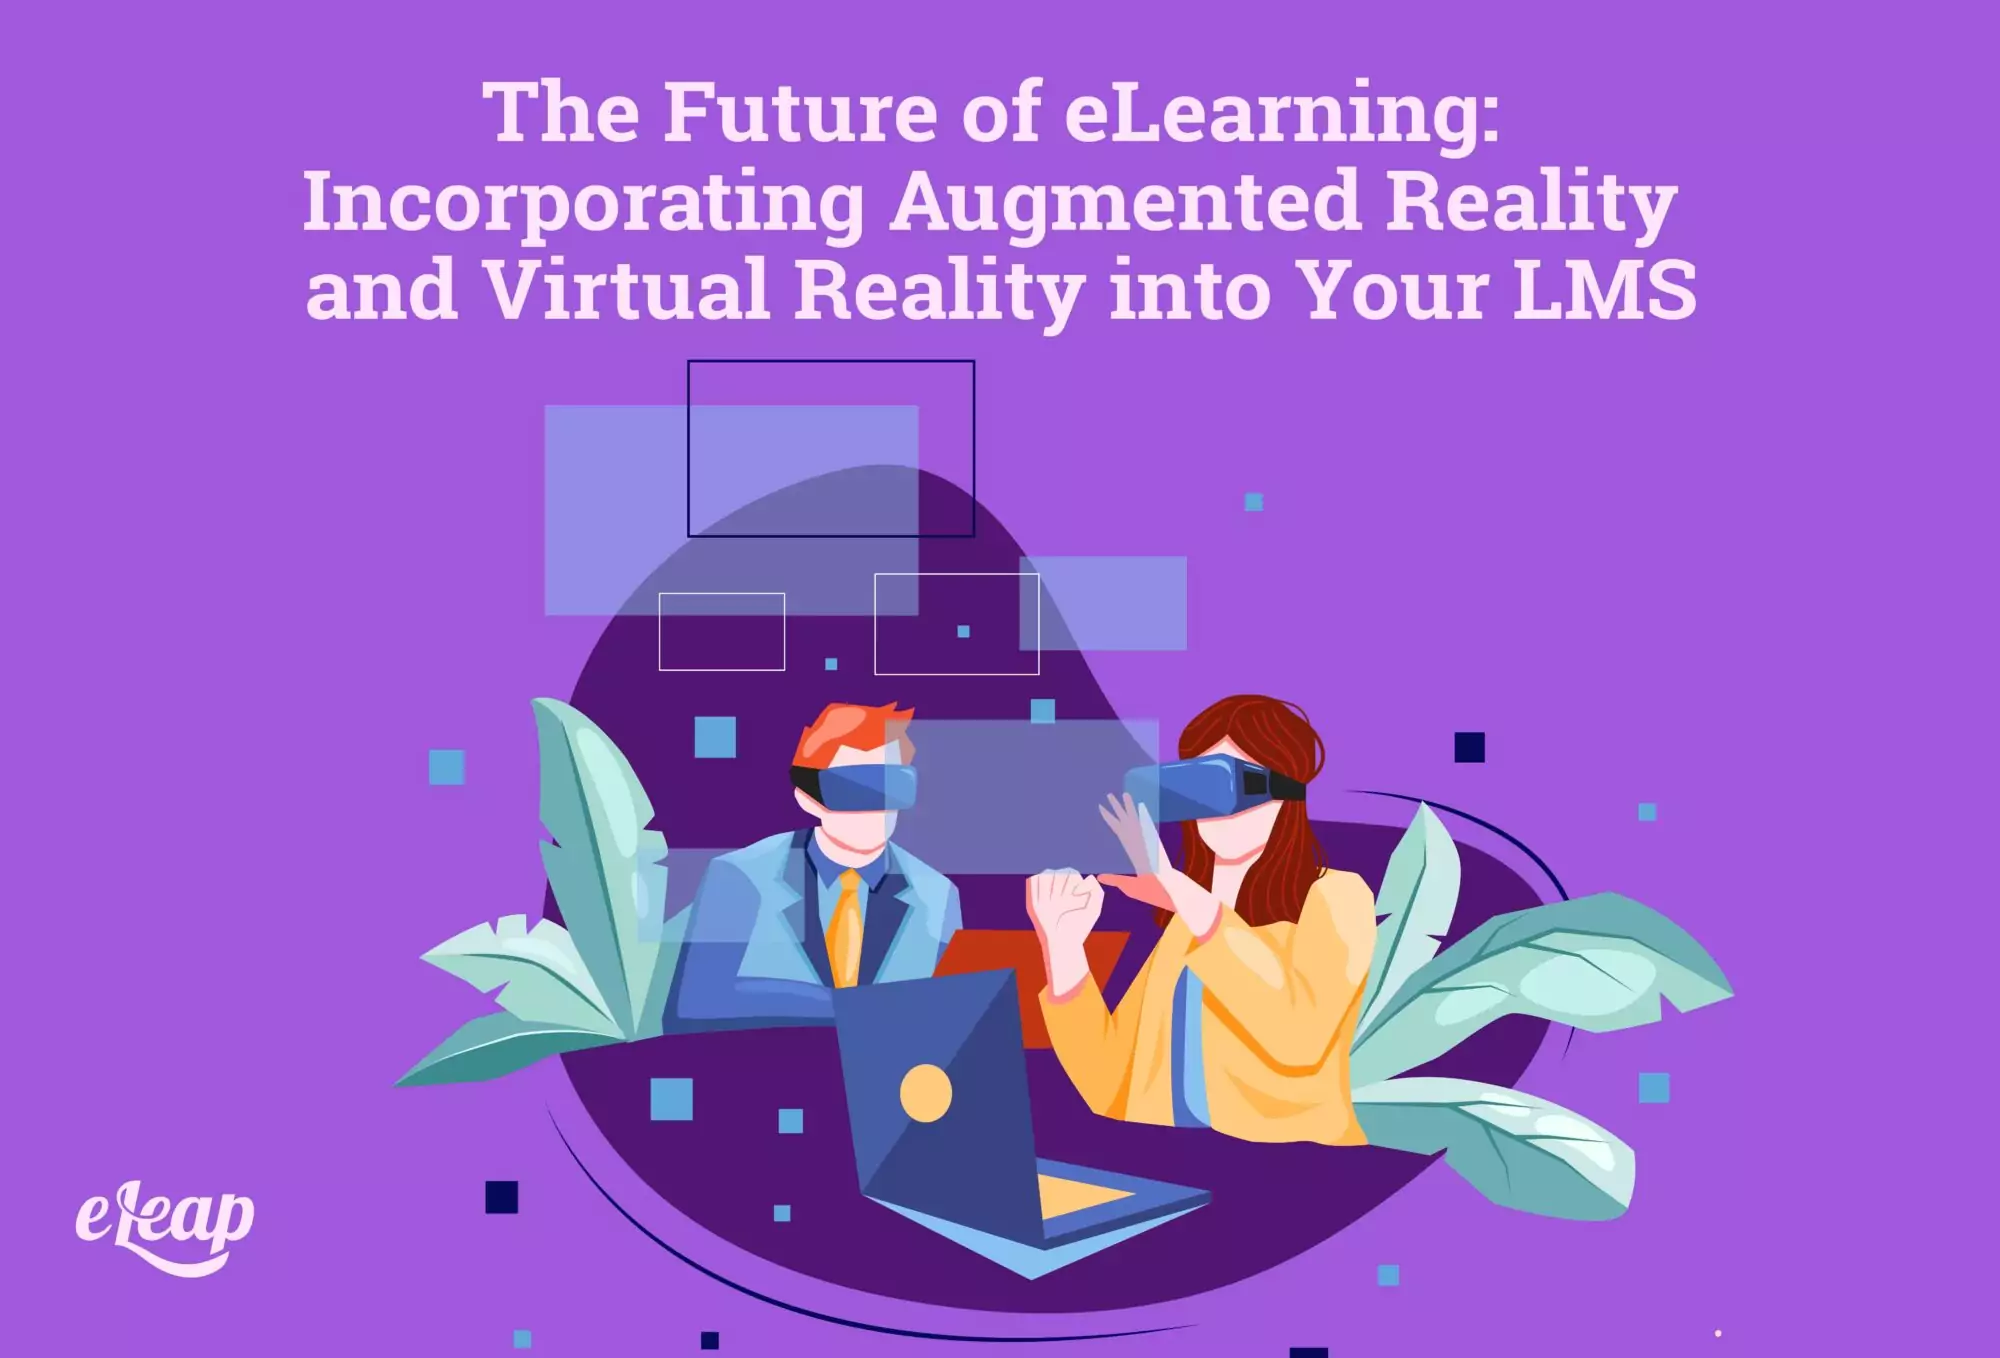 The Future of eLearning: Incorporating Augmented Reality and Virtual Reality into Your LMS